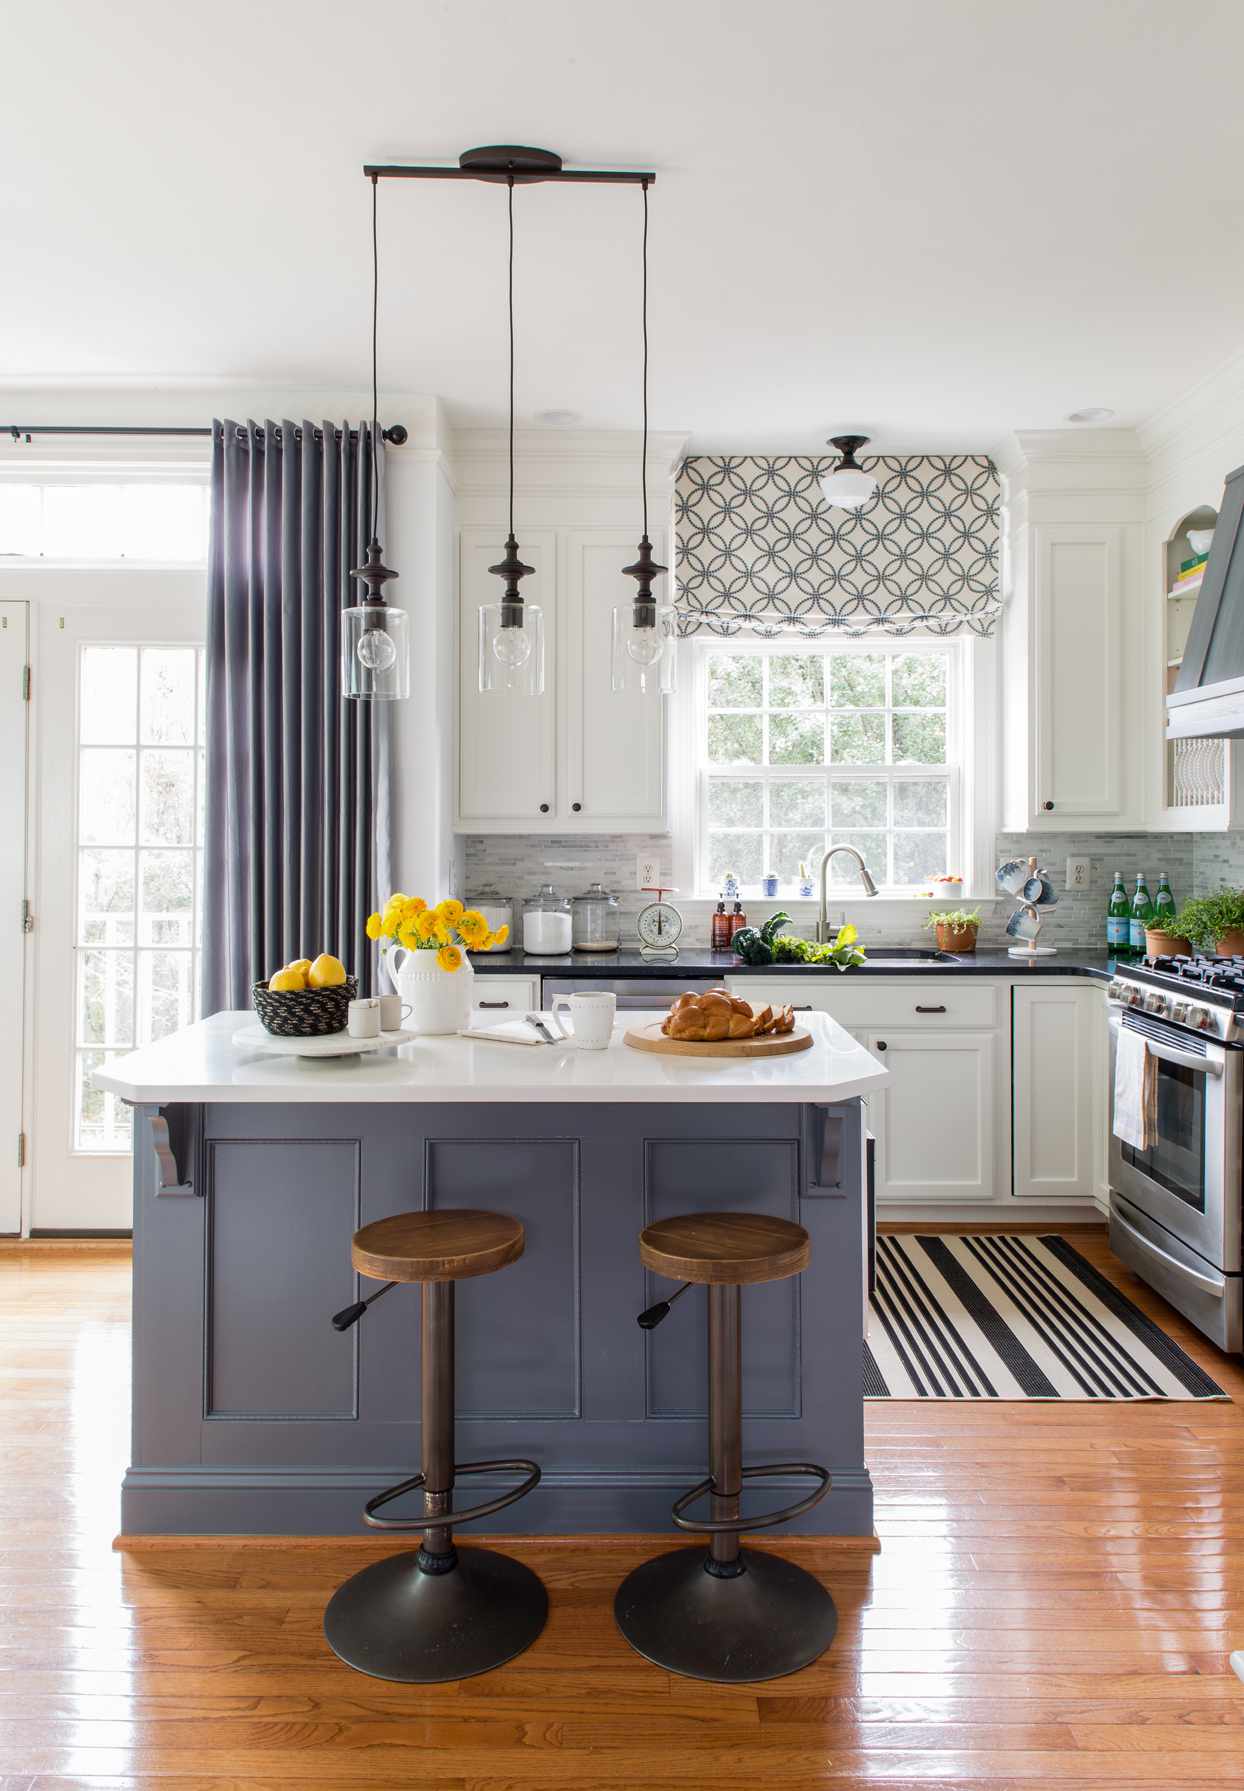 18 Contrasting Kitchen Island Ideas for a Stand Out Space   Better ...